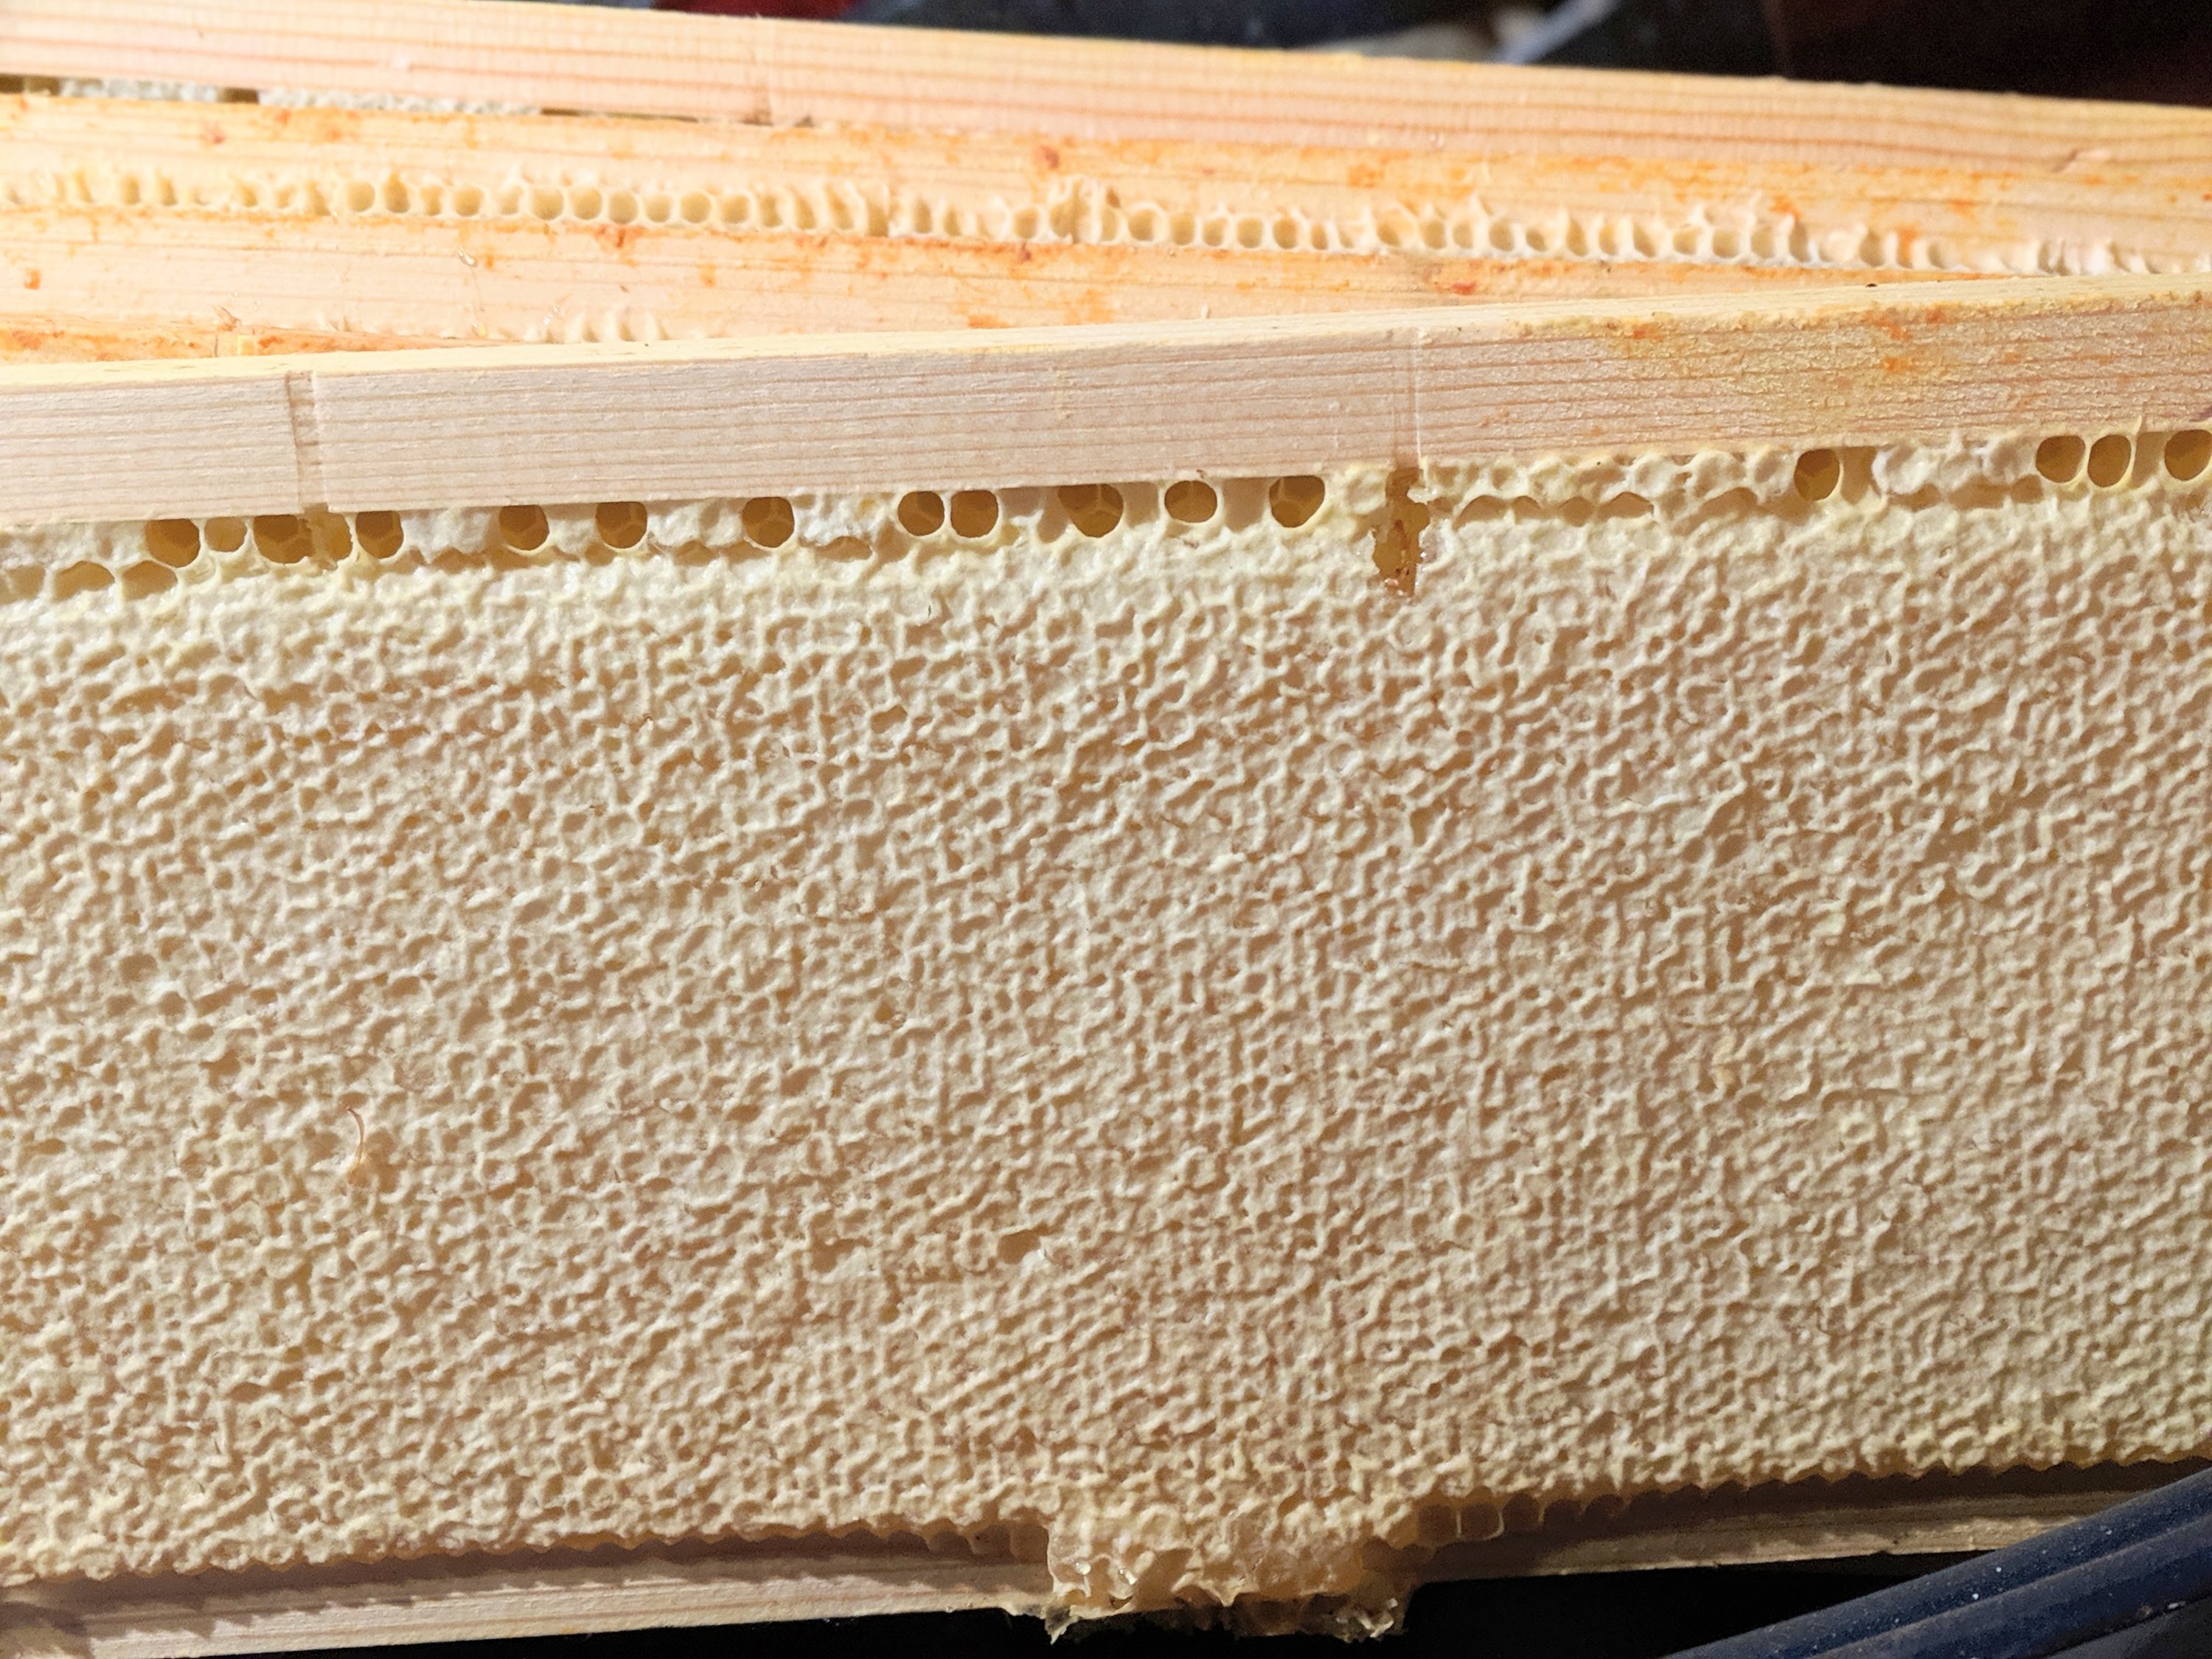 a frame of honey capped with natural beeswax straight from the hive inside the beehive of a beekeeper